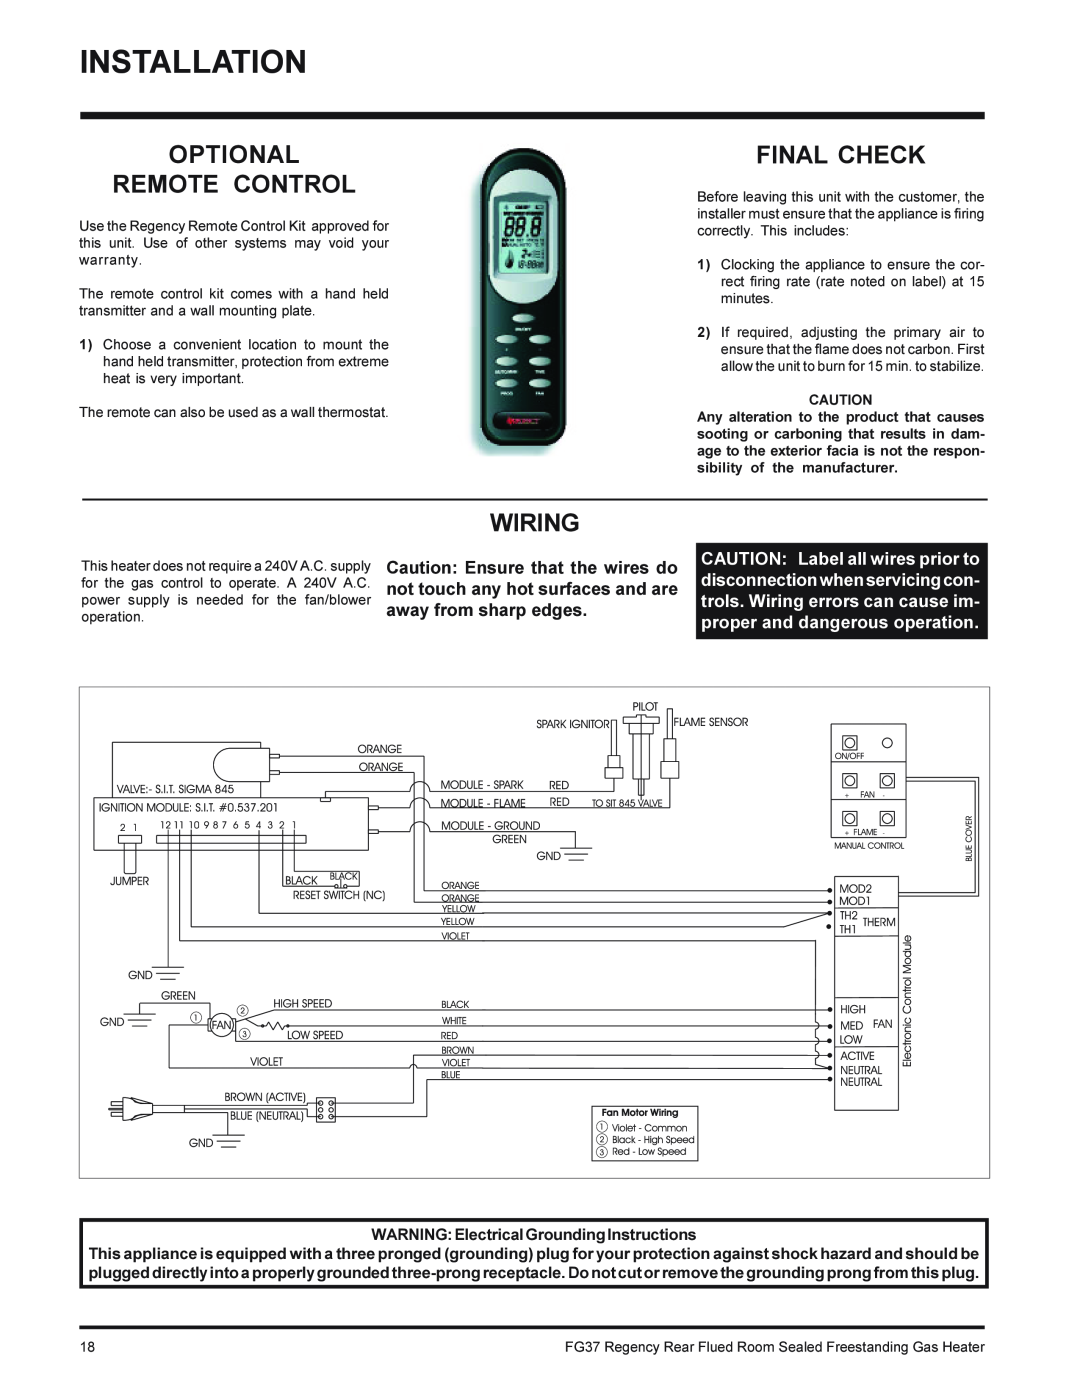 Regency FG37-LPG, FG37-NG Optional Remote Control, Final Check, Wiring, WARNING Electrical Grounding Instructions 